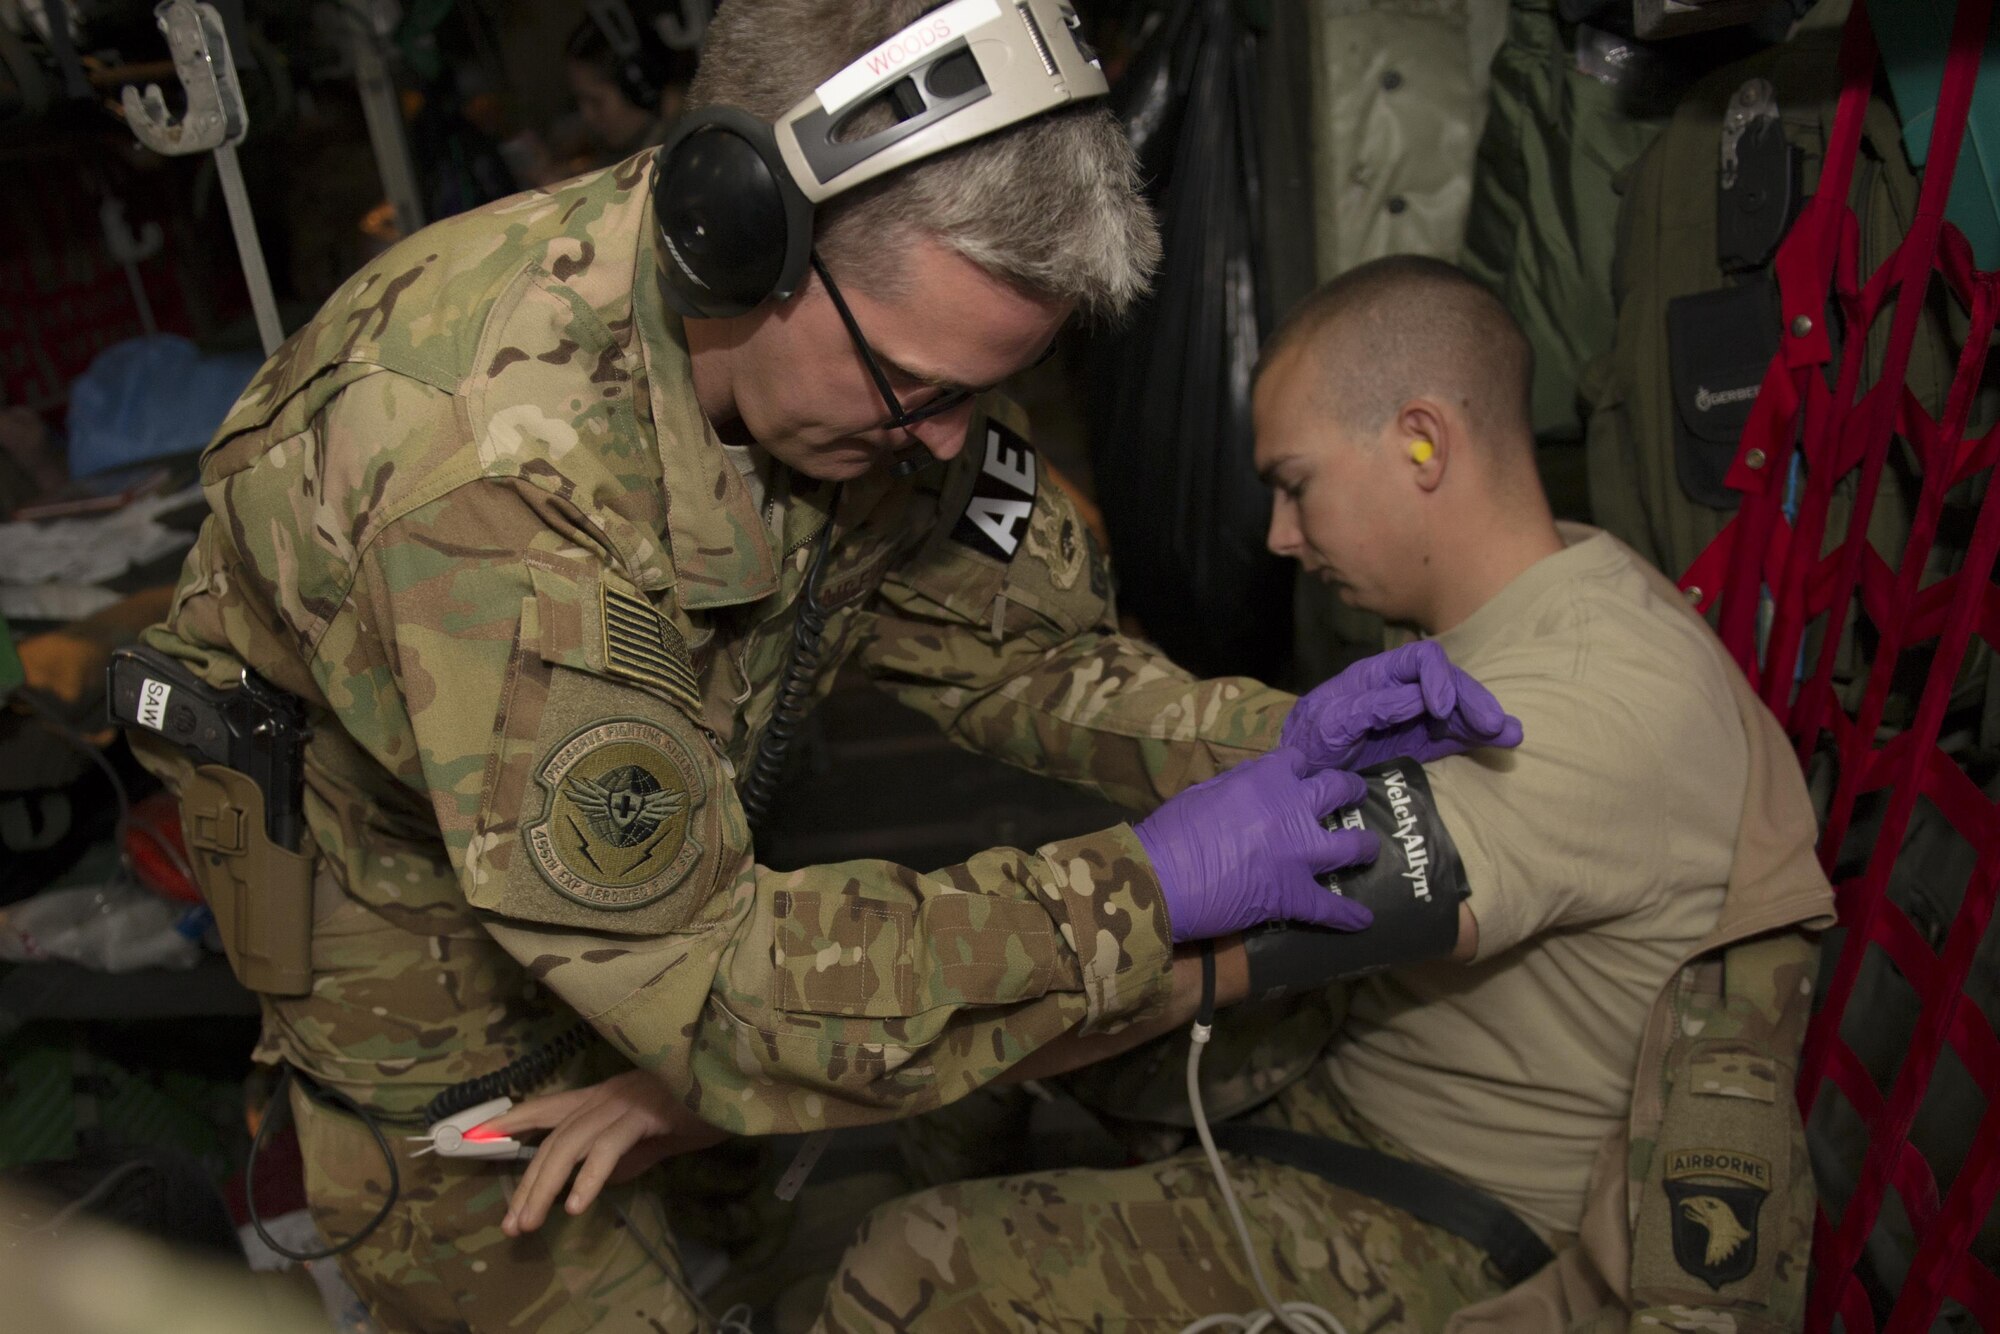 Capt. Steven Woods, 455th Expeditionary Aeromedical Evacuation Squadron flight nurse, deployed from the 43rd AES at Pope Army Airfield, N.C., checks the vitals of a patient during a medevac alert en route to Al Udeid Air Base, Qatar, from Bagram Airfield, Afghanistan, Nov. 6, 2015. The 455th EAES is tasked with moving injured and sick patients to locations with higher levels of medical care. (U.S. Air Force photo by Tech. Sgt. Robert Cloys/RELEASED)